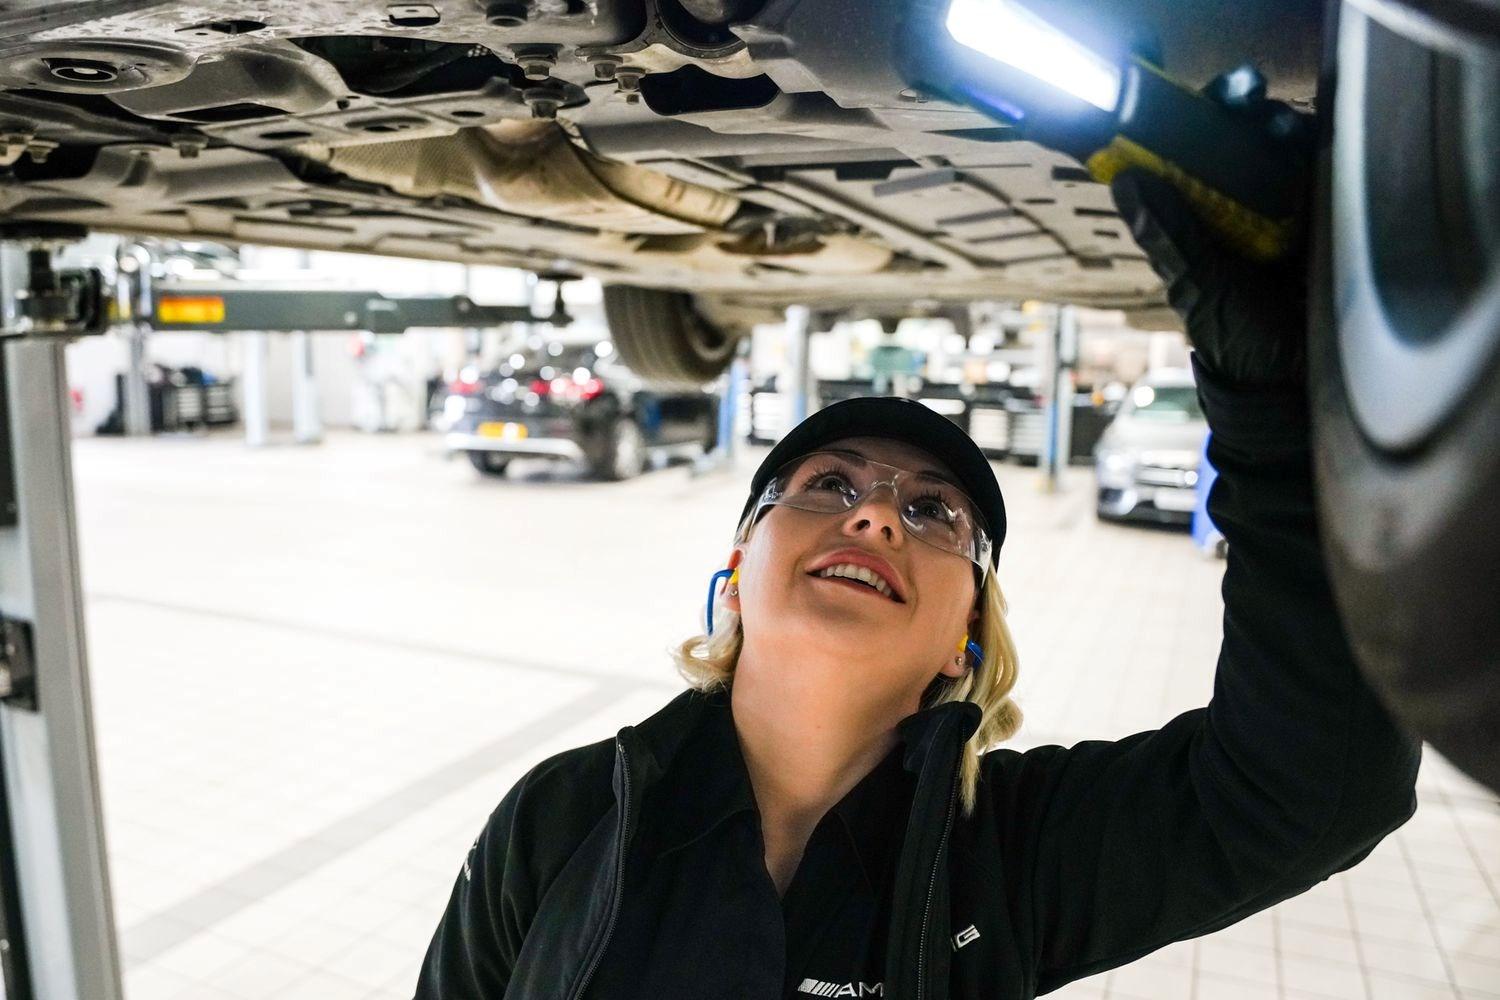 Mercedes-Benz Technician inspects the undercarriage of a Mercedes-Benz vehicle with a handheld light during MOT inspection